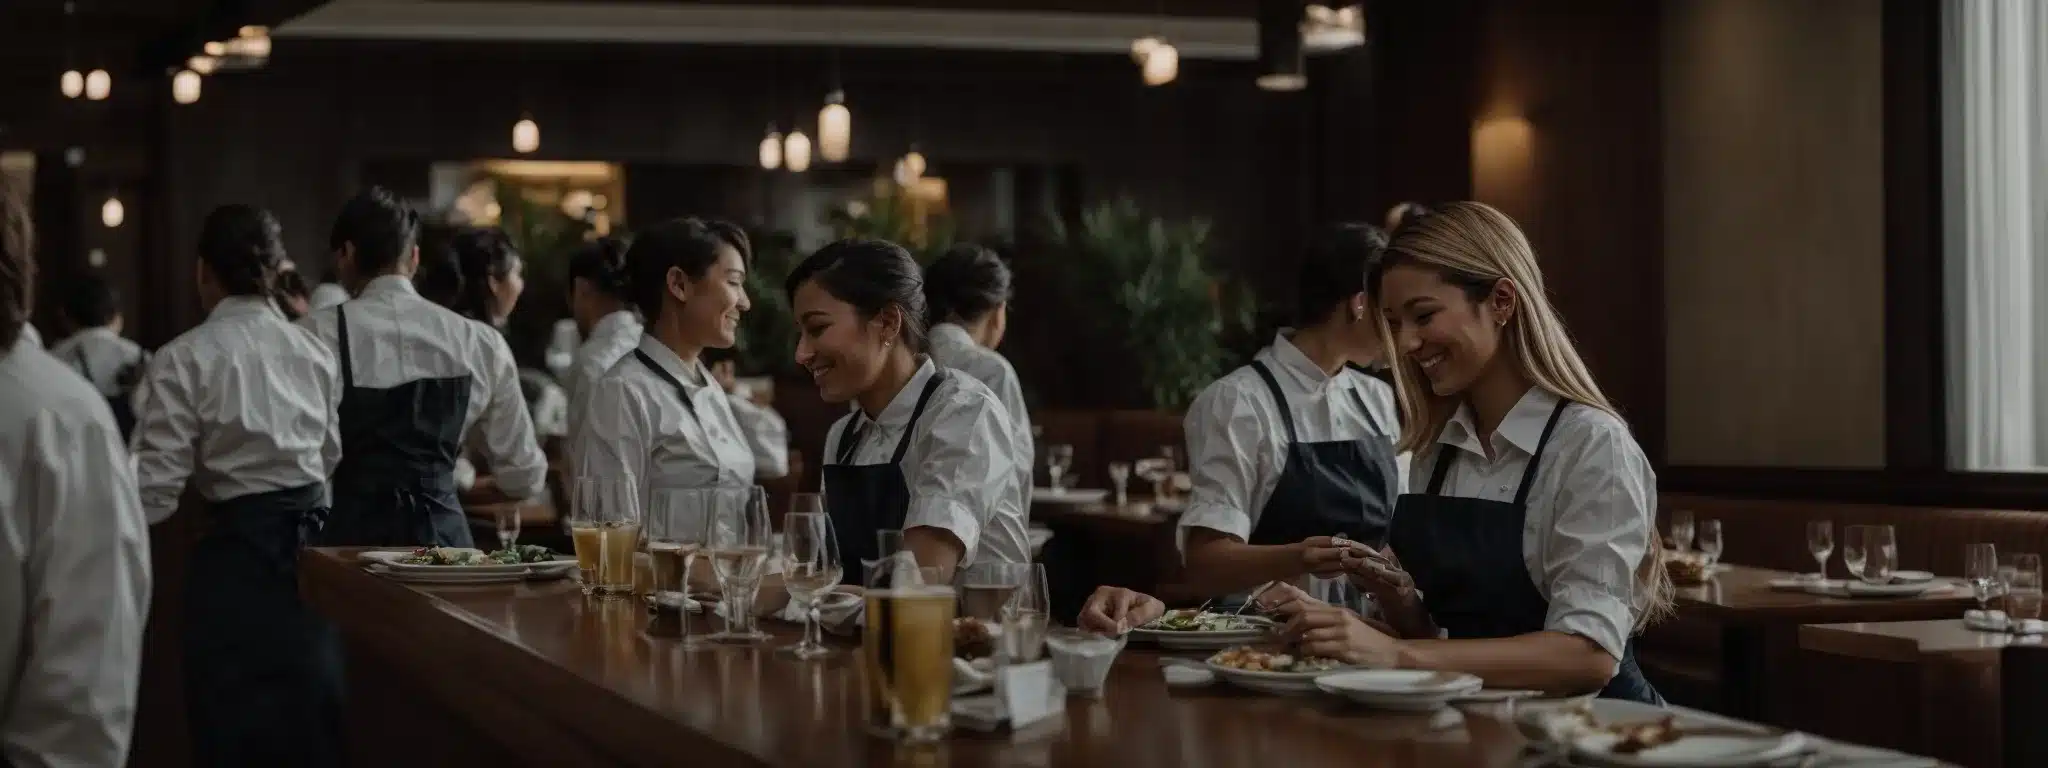 A Team Of Smiling Waitstaff Gracefully Attending To Diners At An Elegant Restaurant.